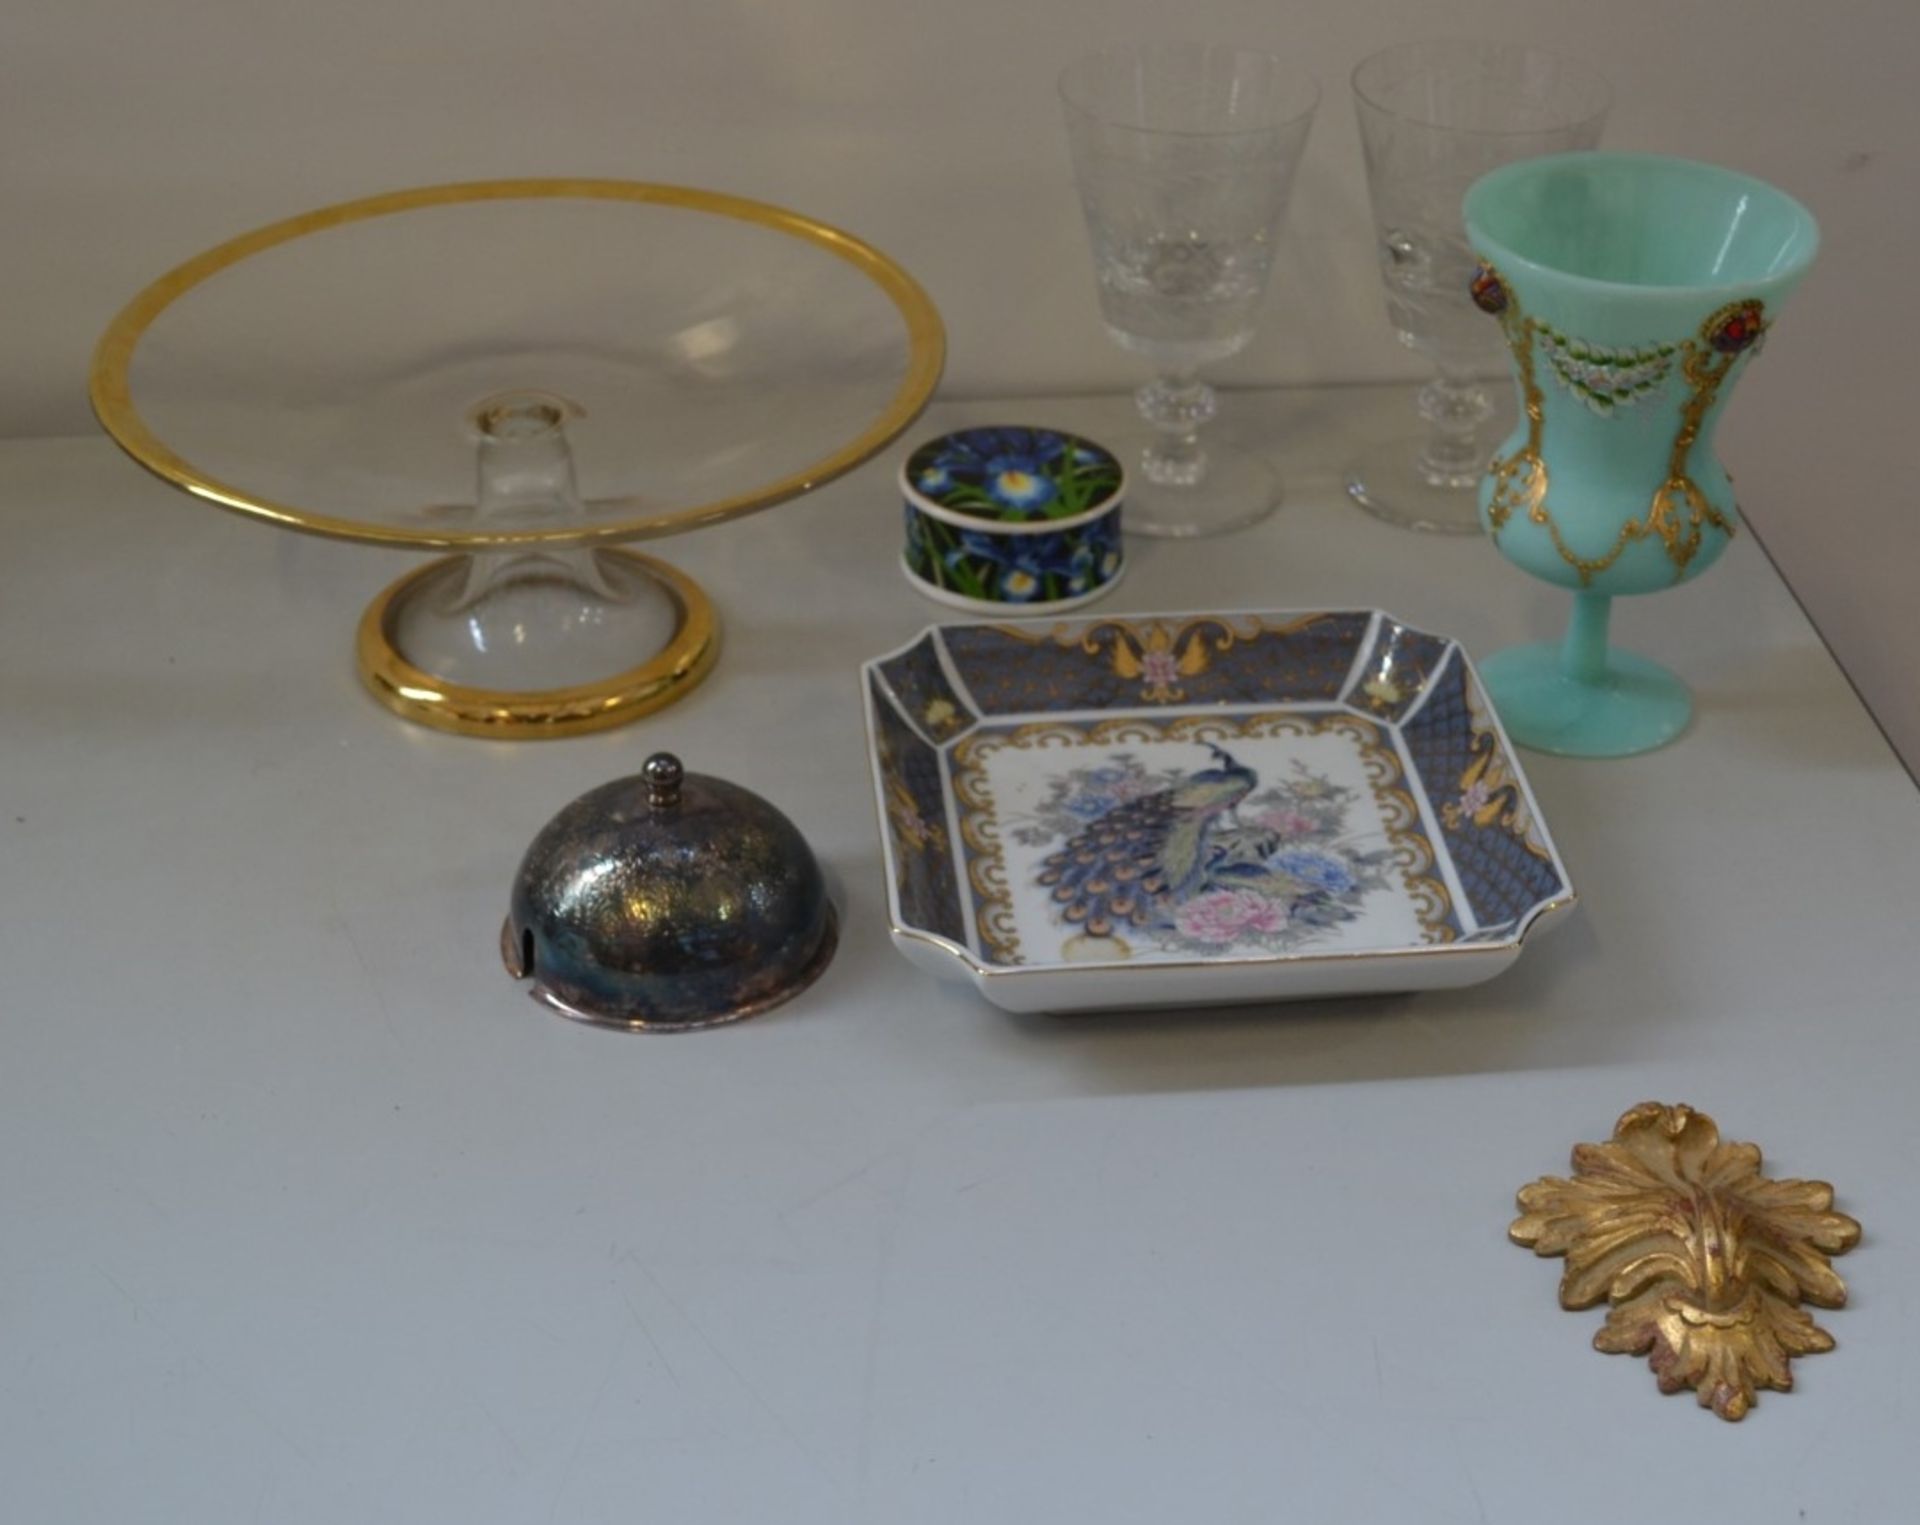 1 x Mixed Antique Items (Glasses,Bowl And Jewelry Box) - Ref J2151 - CL314